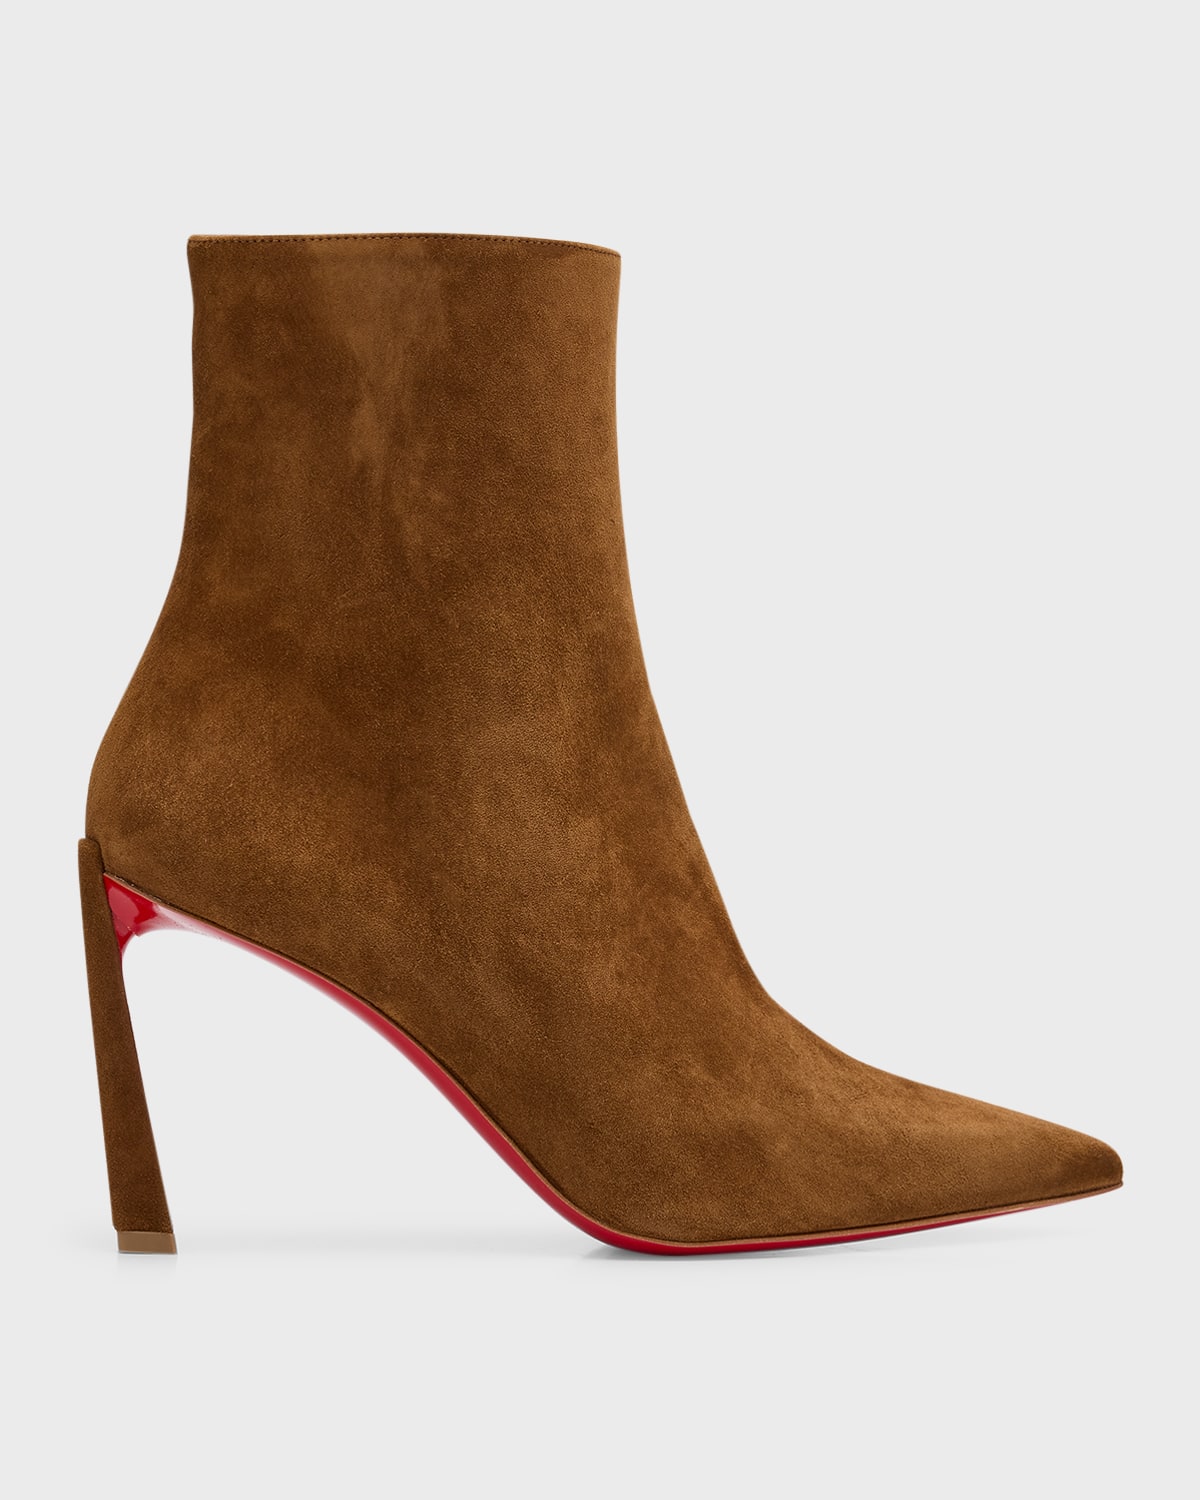 CHRISTIAN LOUBOUTIN CONDORA SUEDE STILETTO RED SOLE BOOTIES